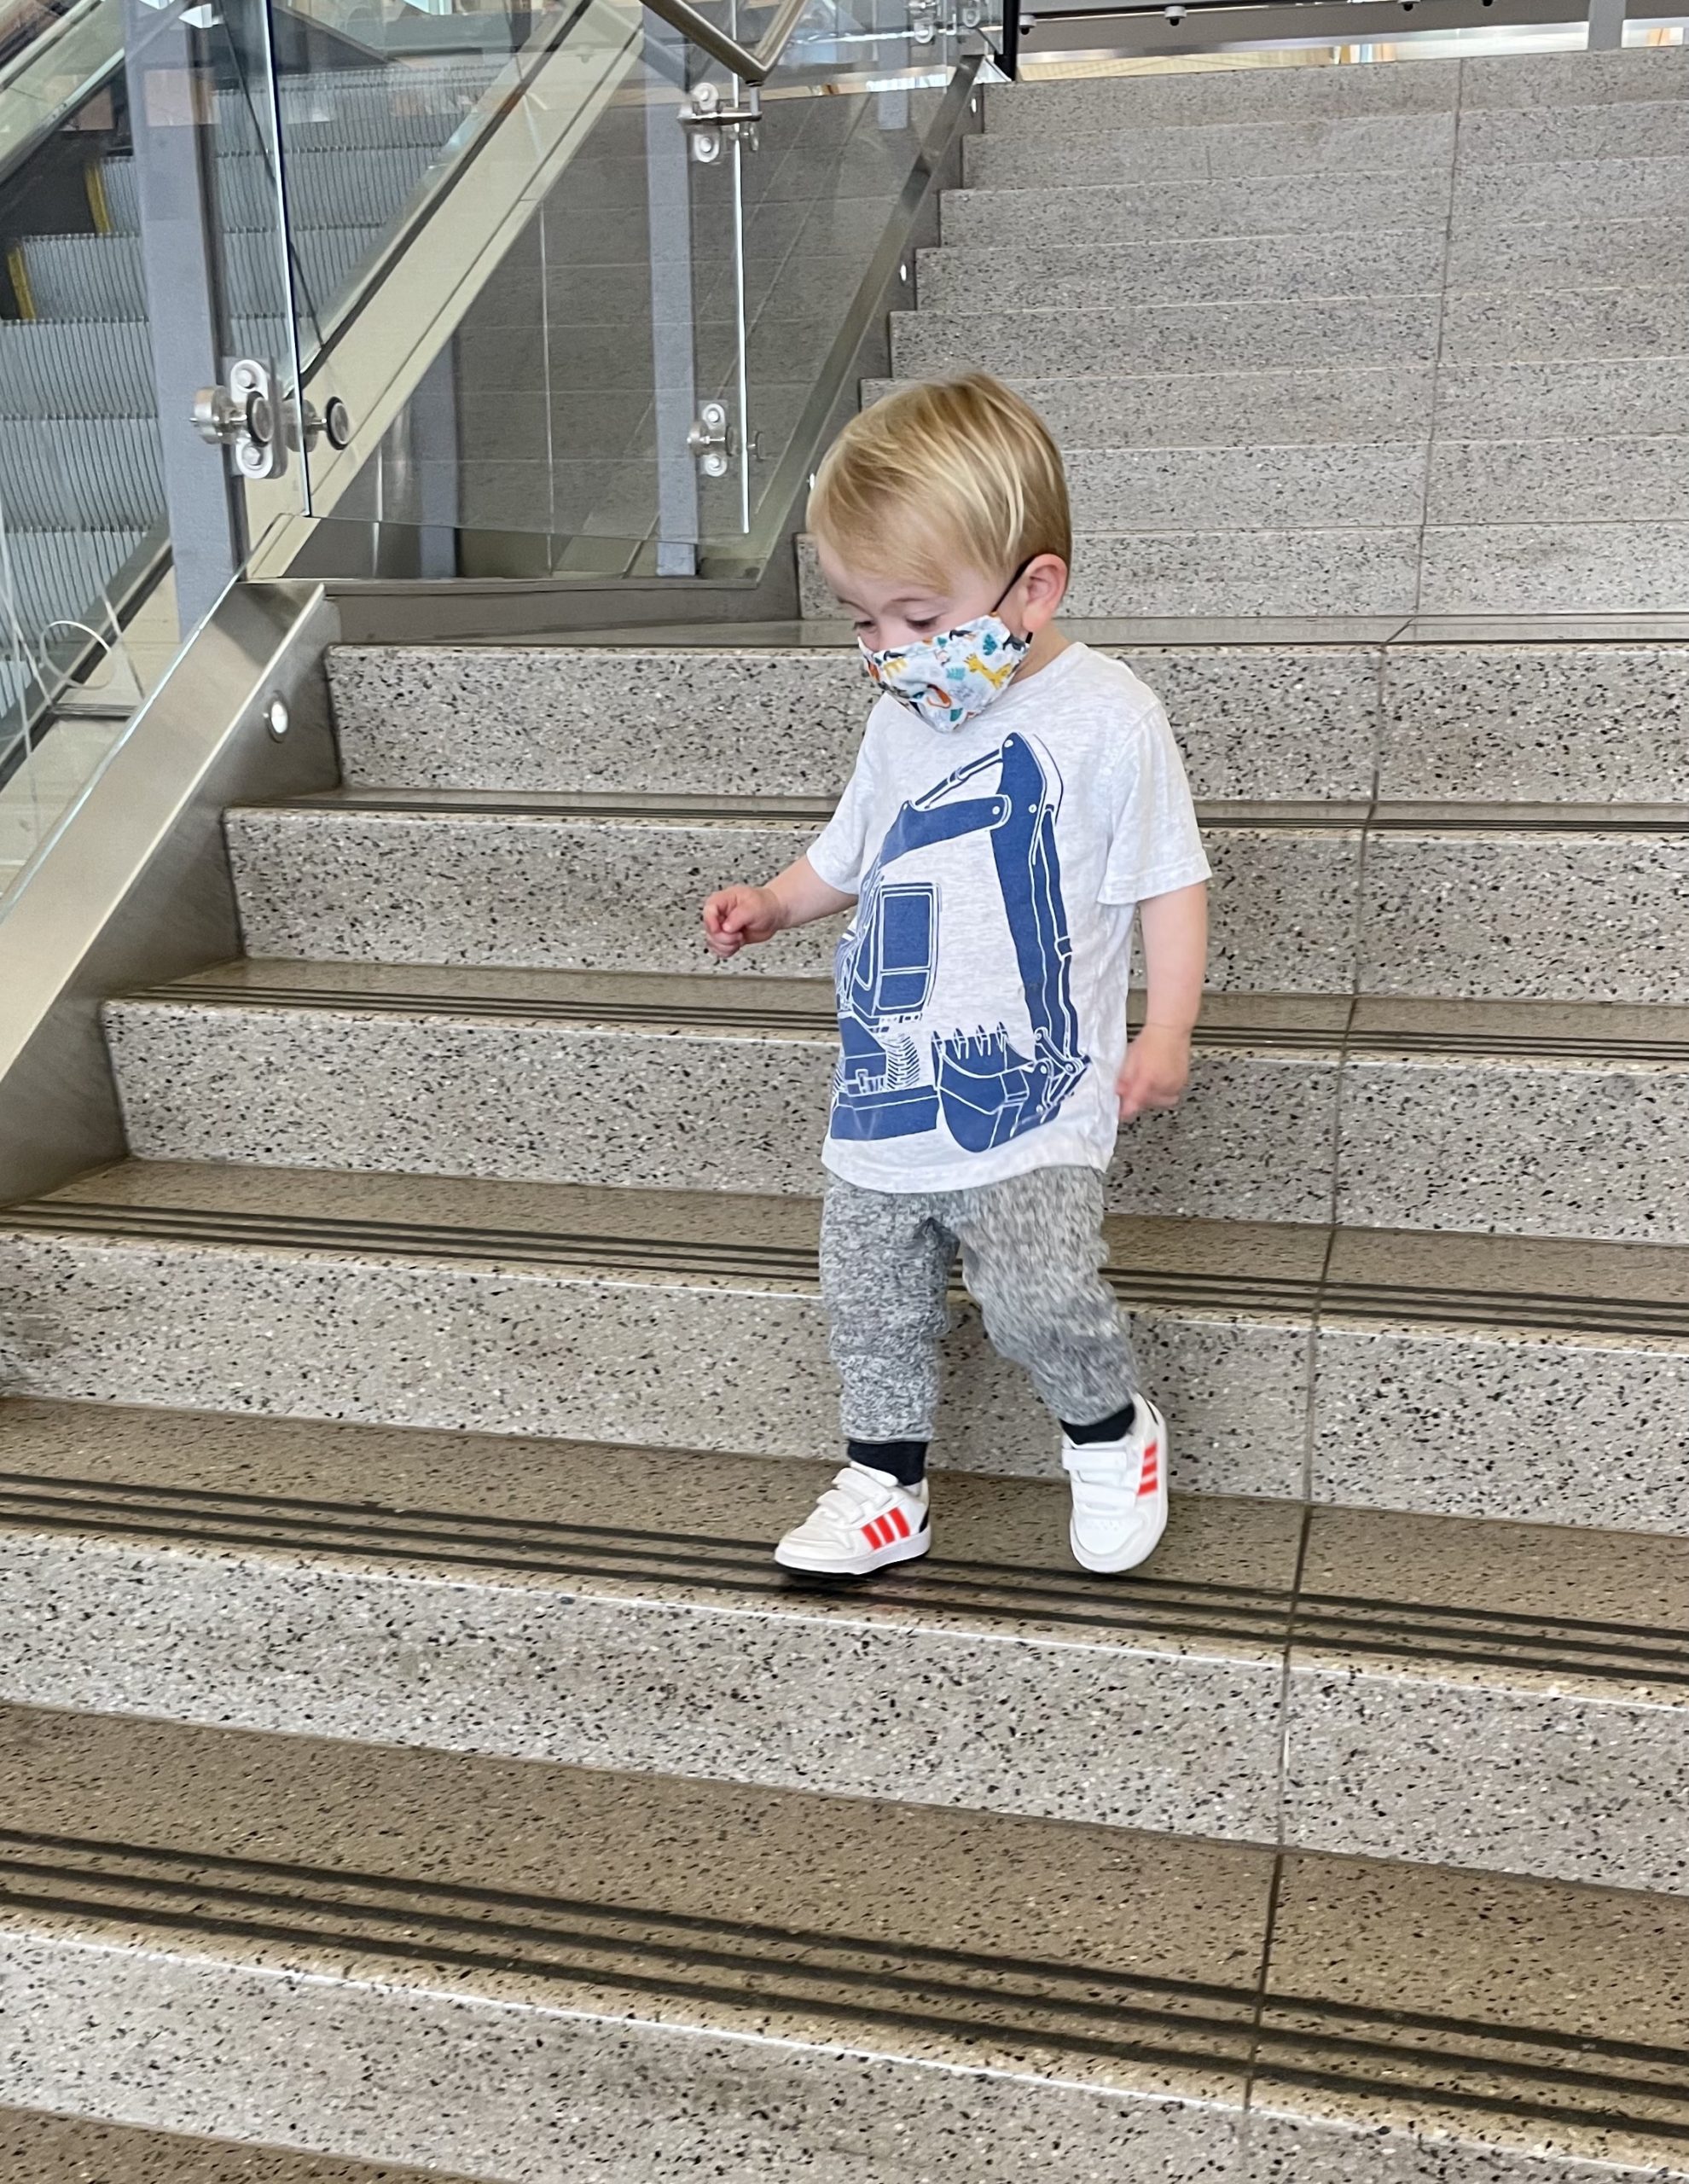 traveling with a toddler on a plane - toddler walking on airport steps